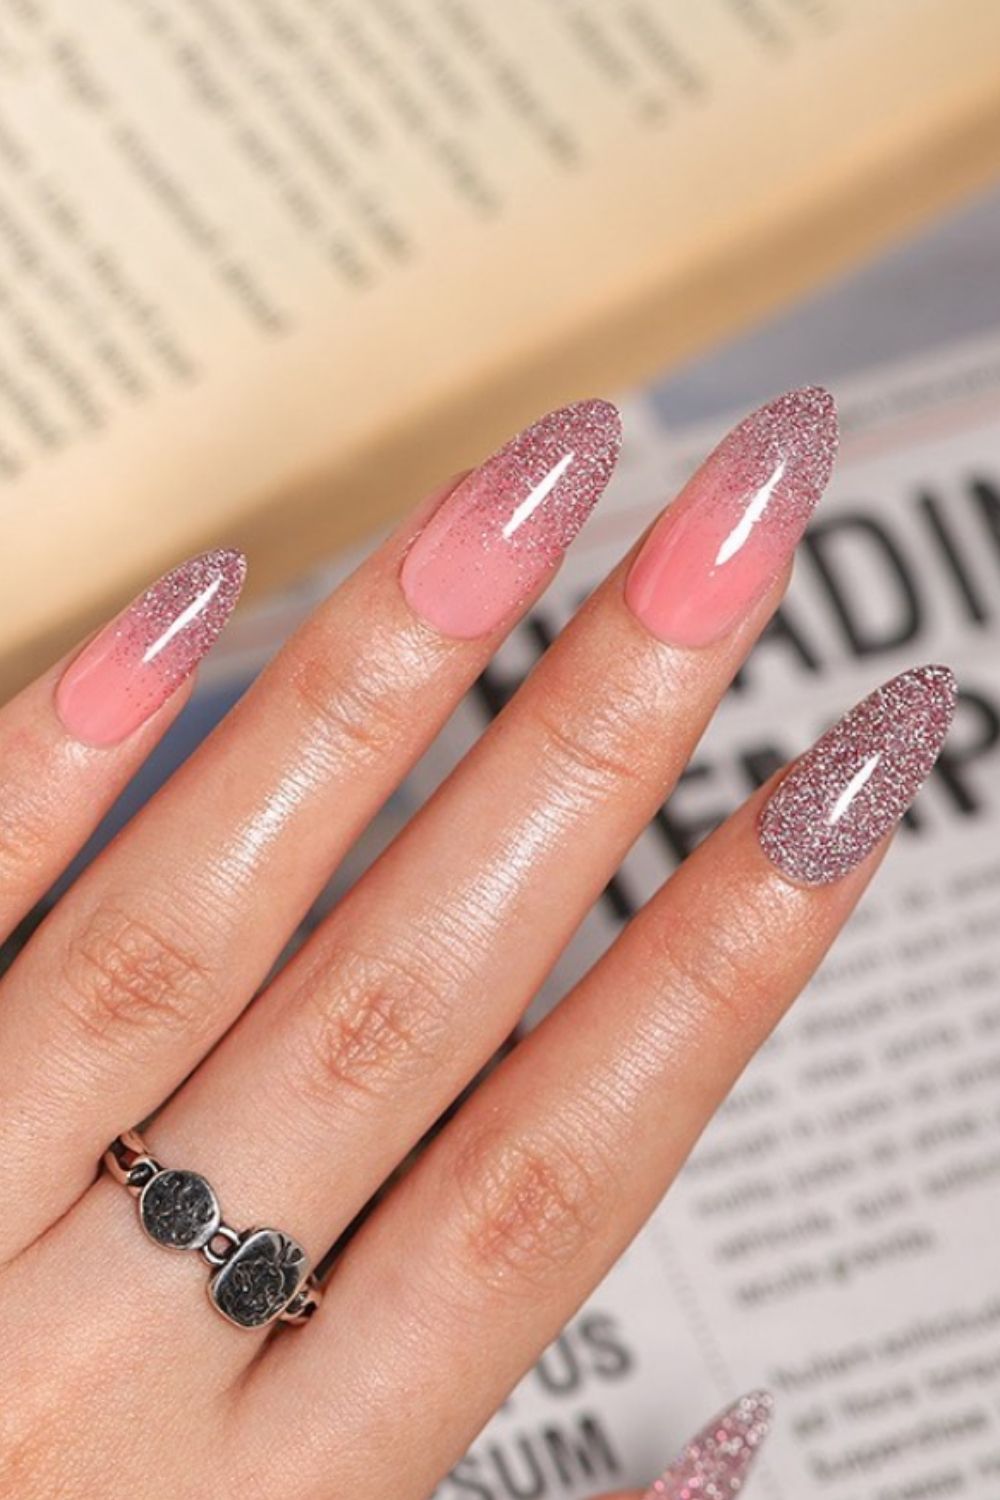 Glitter and pink almond shaped nails